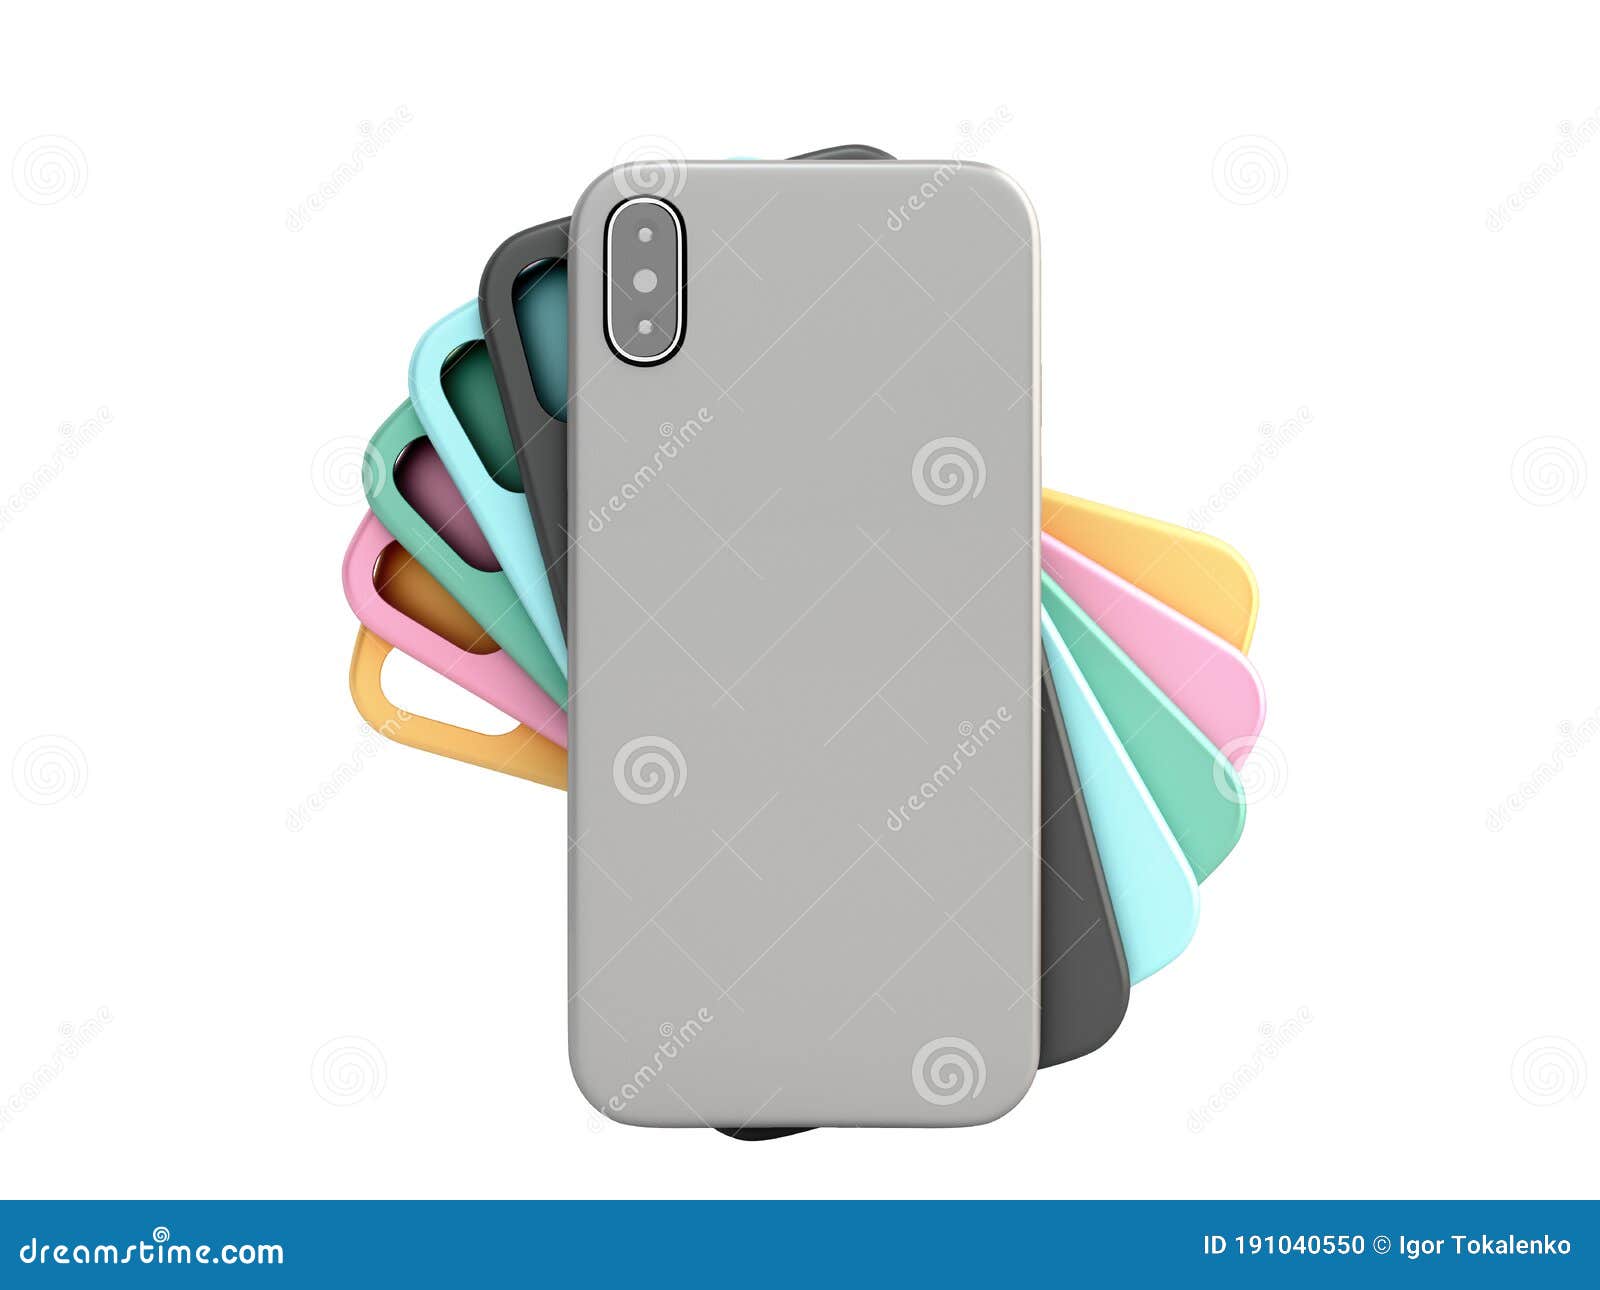 multicolored phone cases presentation for showcase 3d render on white no shadow